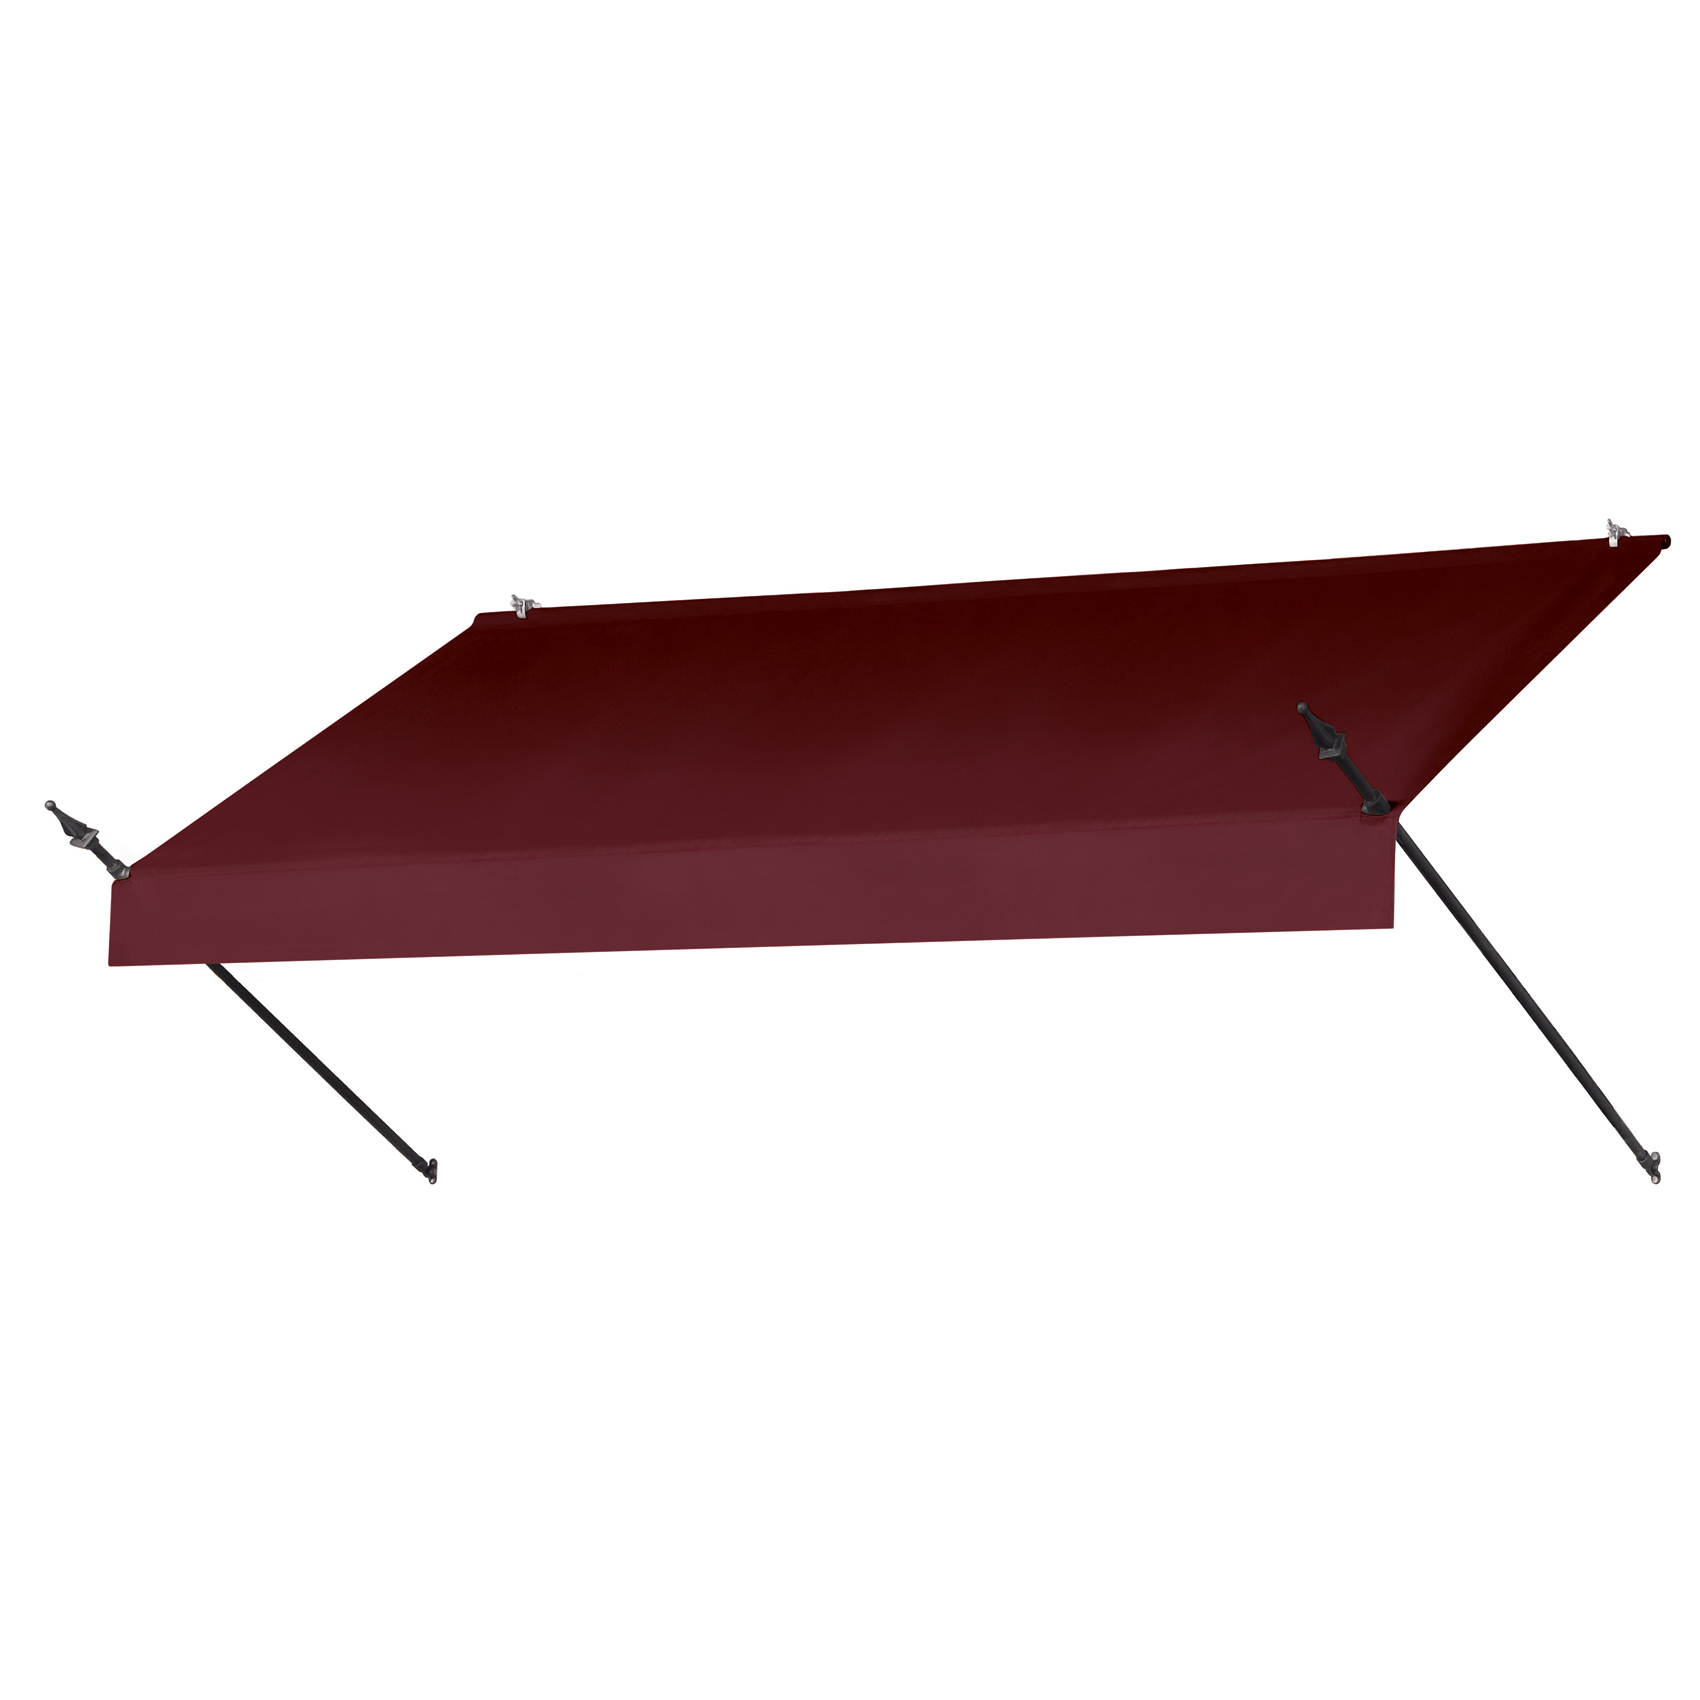 Awnings in a Box&reg; 8' Designer Style Awning Replacement Cover in Assorted Colors